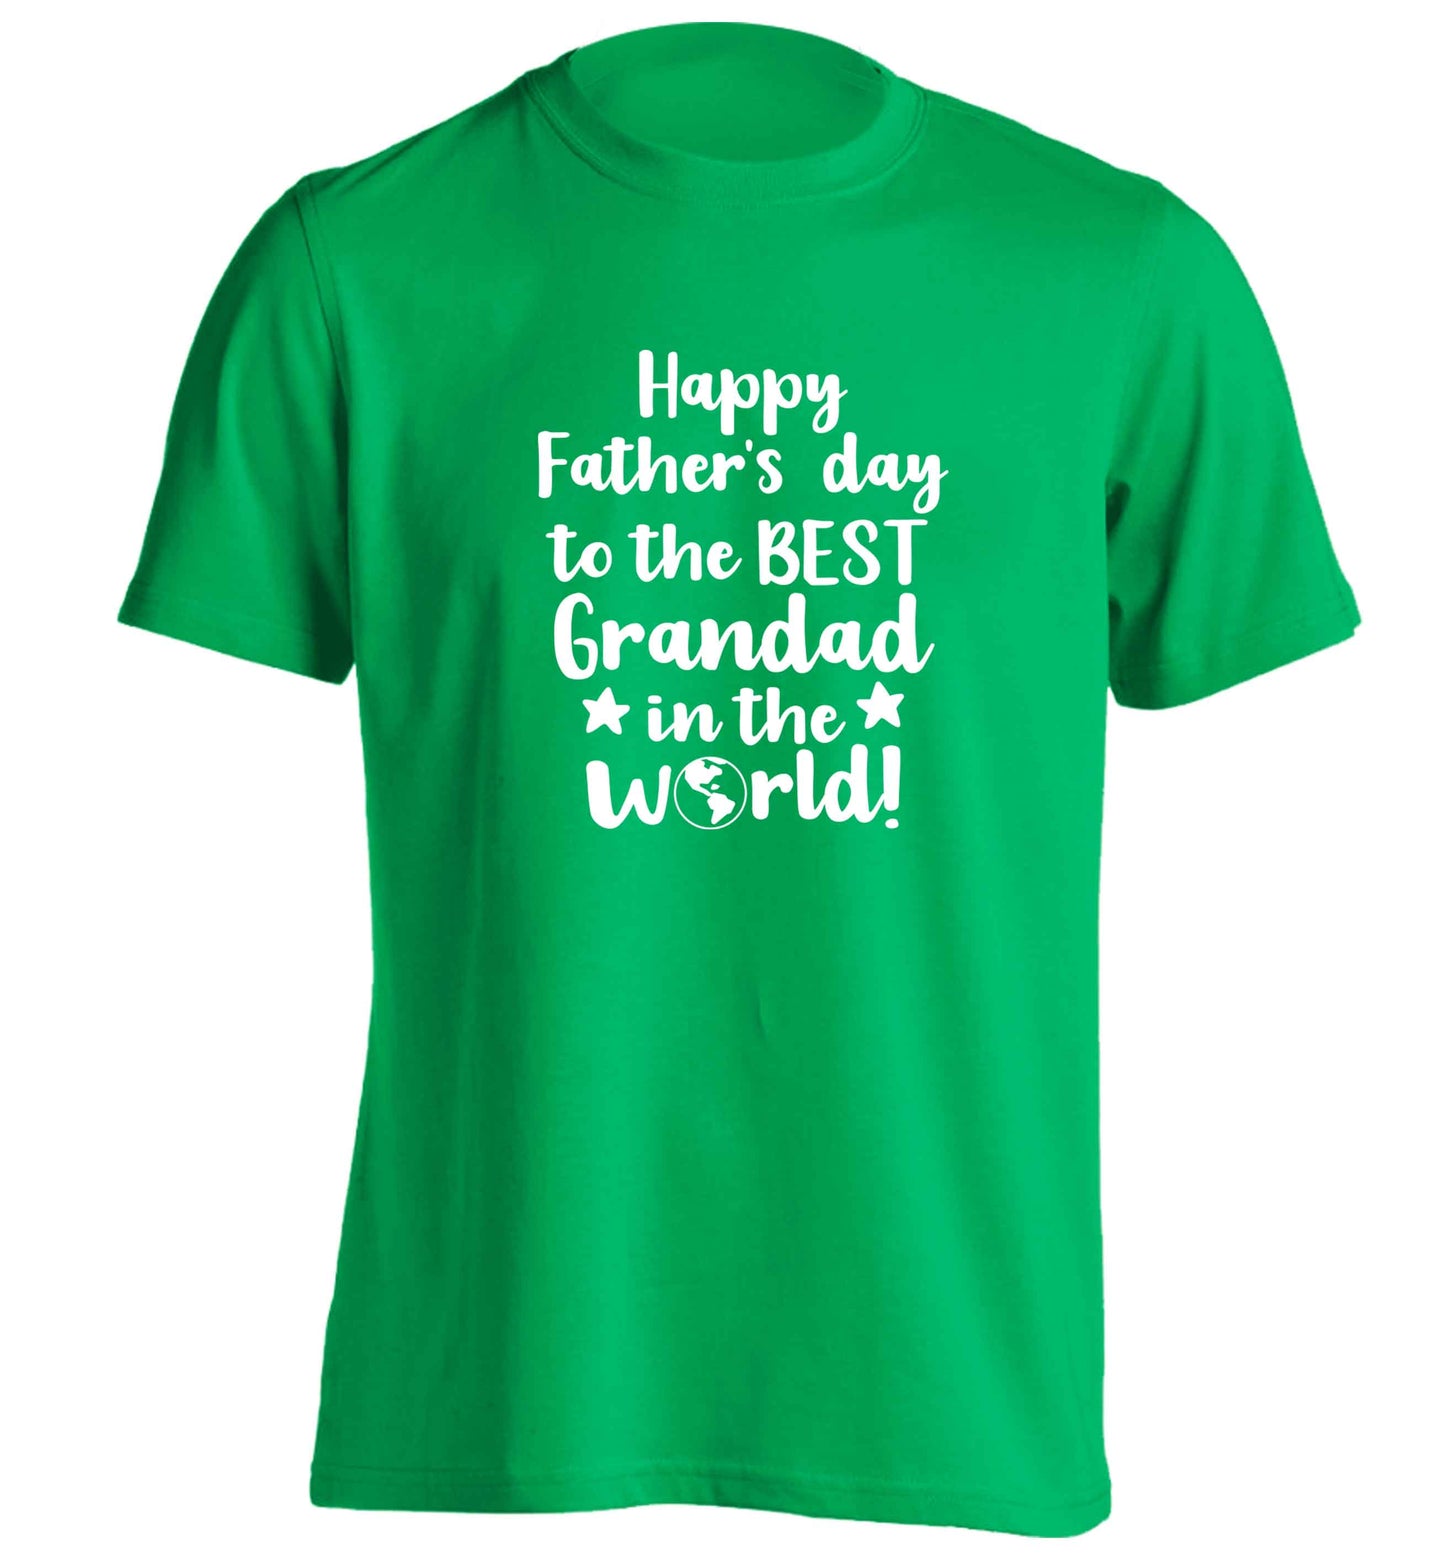 Happy Father's day to the best grandad in the world adults unisex green Tshirt 2XL